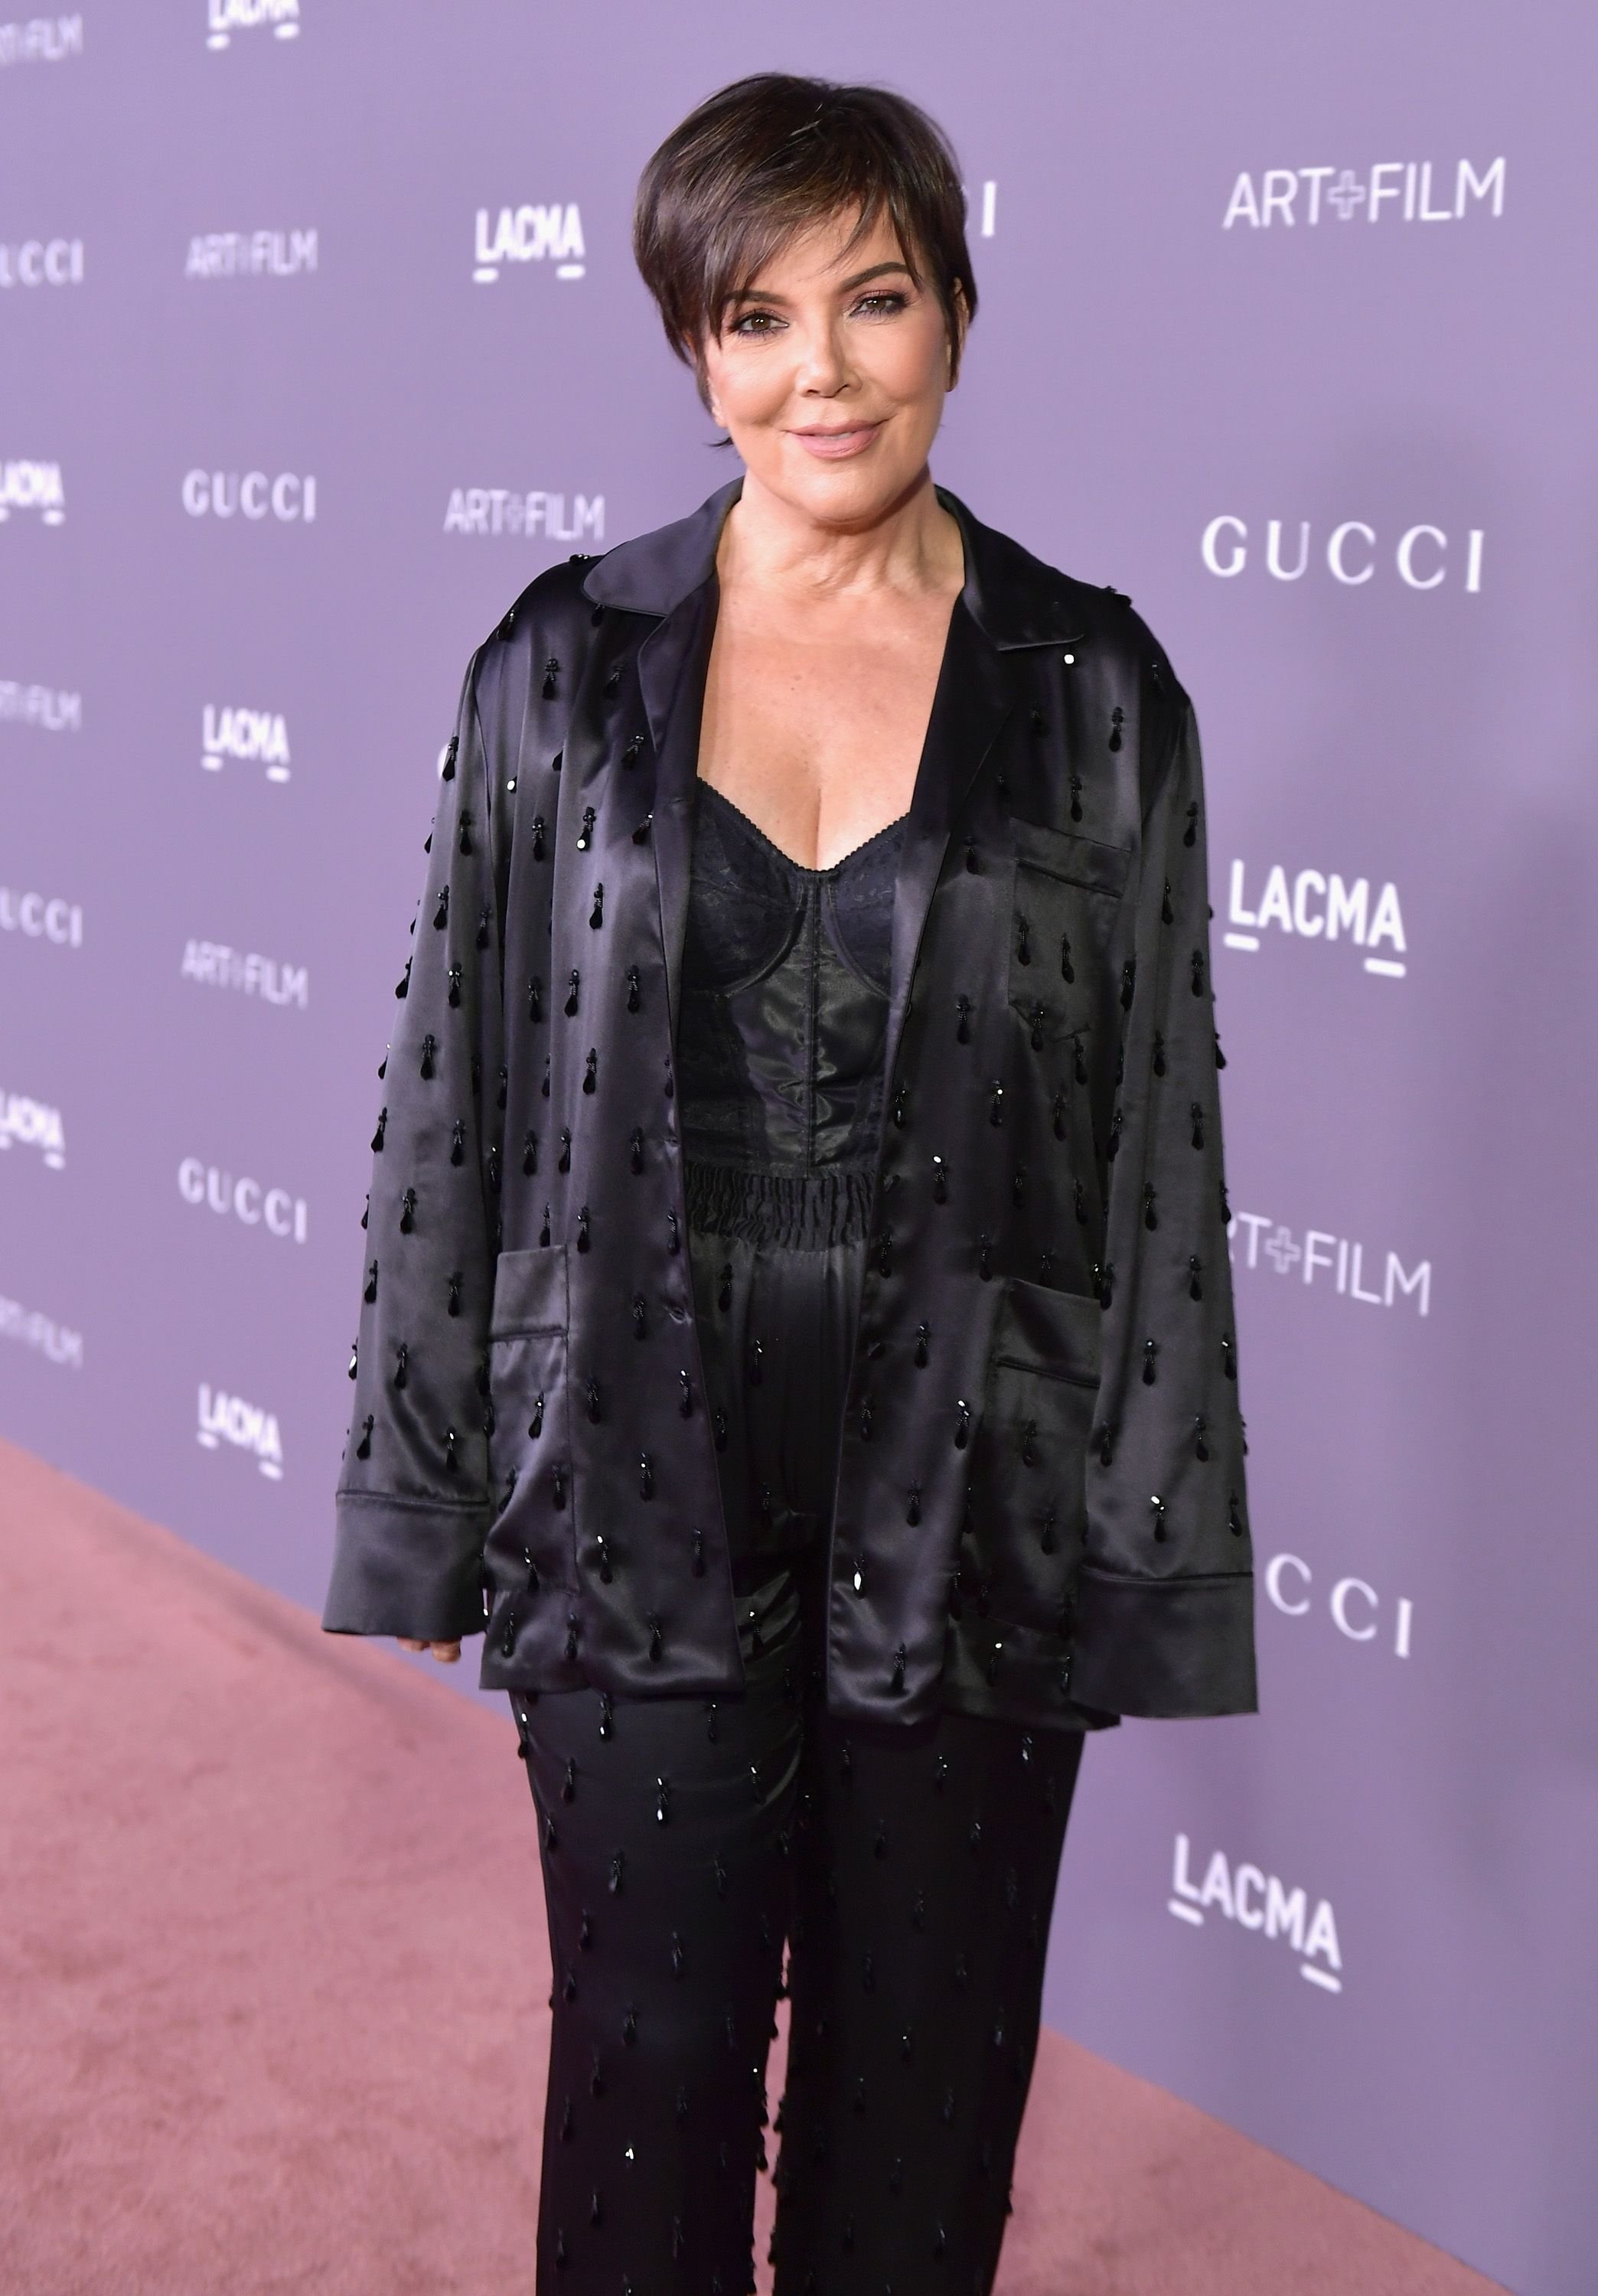 Kris Jenner at the 2017 LACMA Art + Film Gala Honoring Mark Bradford and George Lucas presented by Gucci at LACMA on November 4, 2017 | Photo: Getty Images